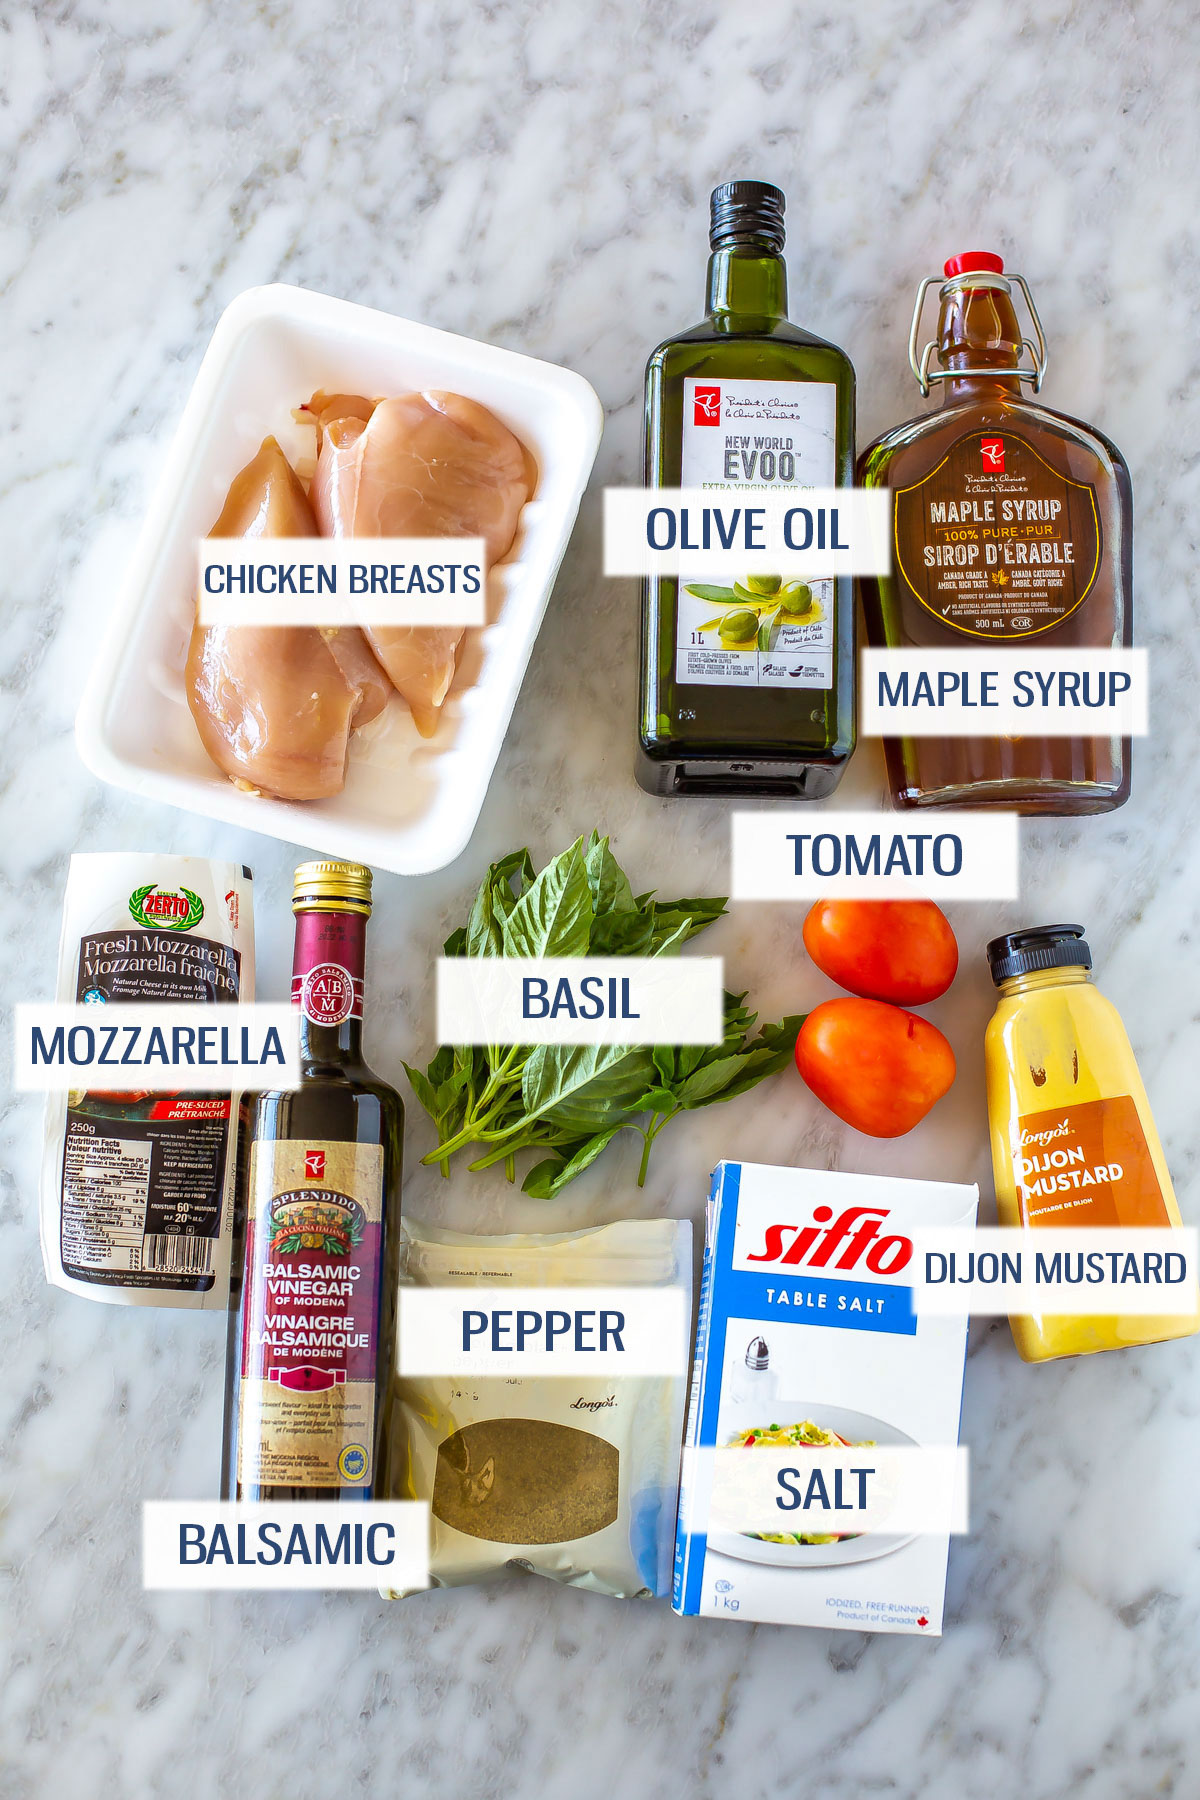 Ingredients for hasselback caprese chicken: chicken breasts, olive oil, maple syrup, mozzarella, balsamic vinegar, salt, pepper, basil, tomatoes and Dijon mustard.